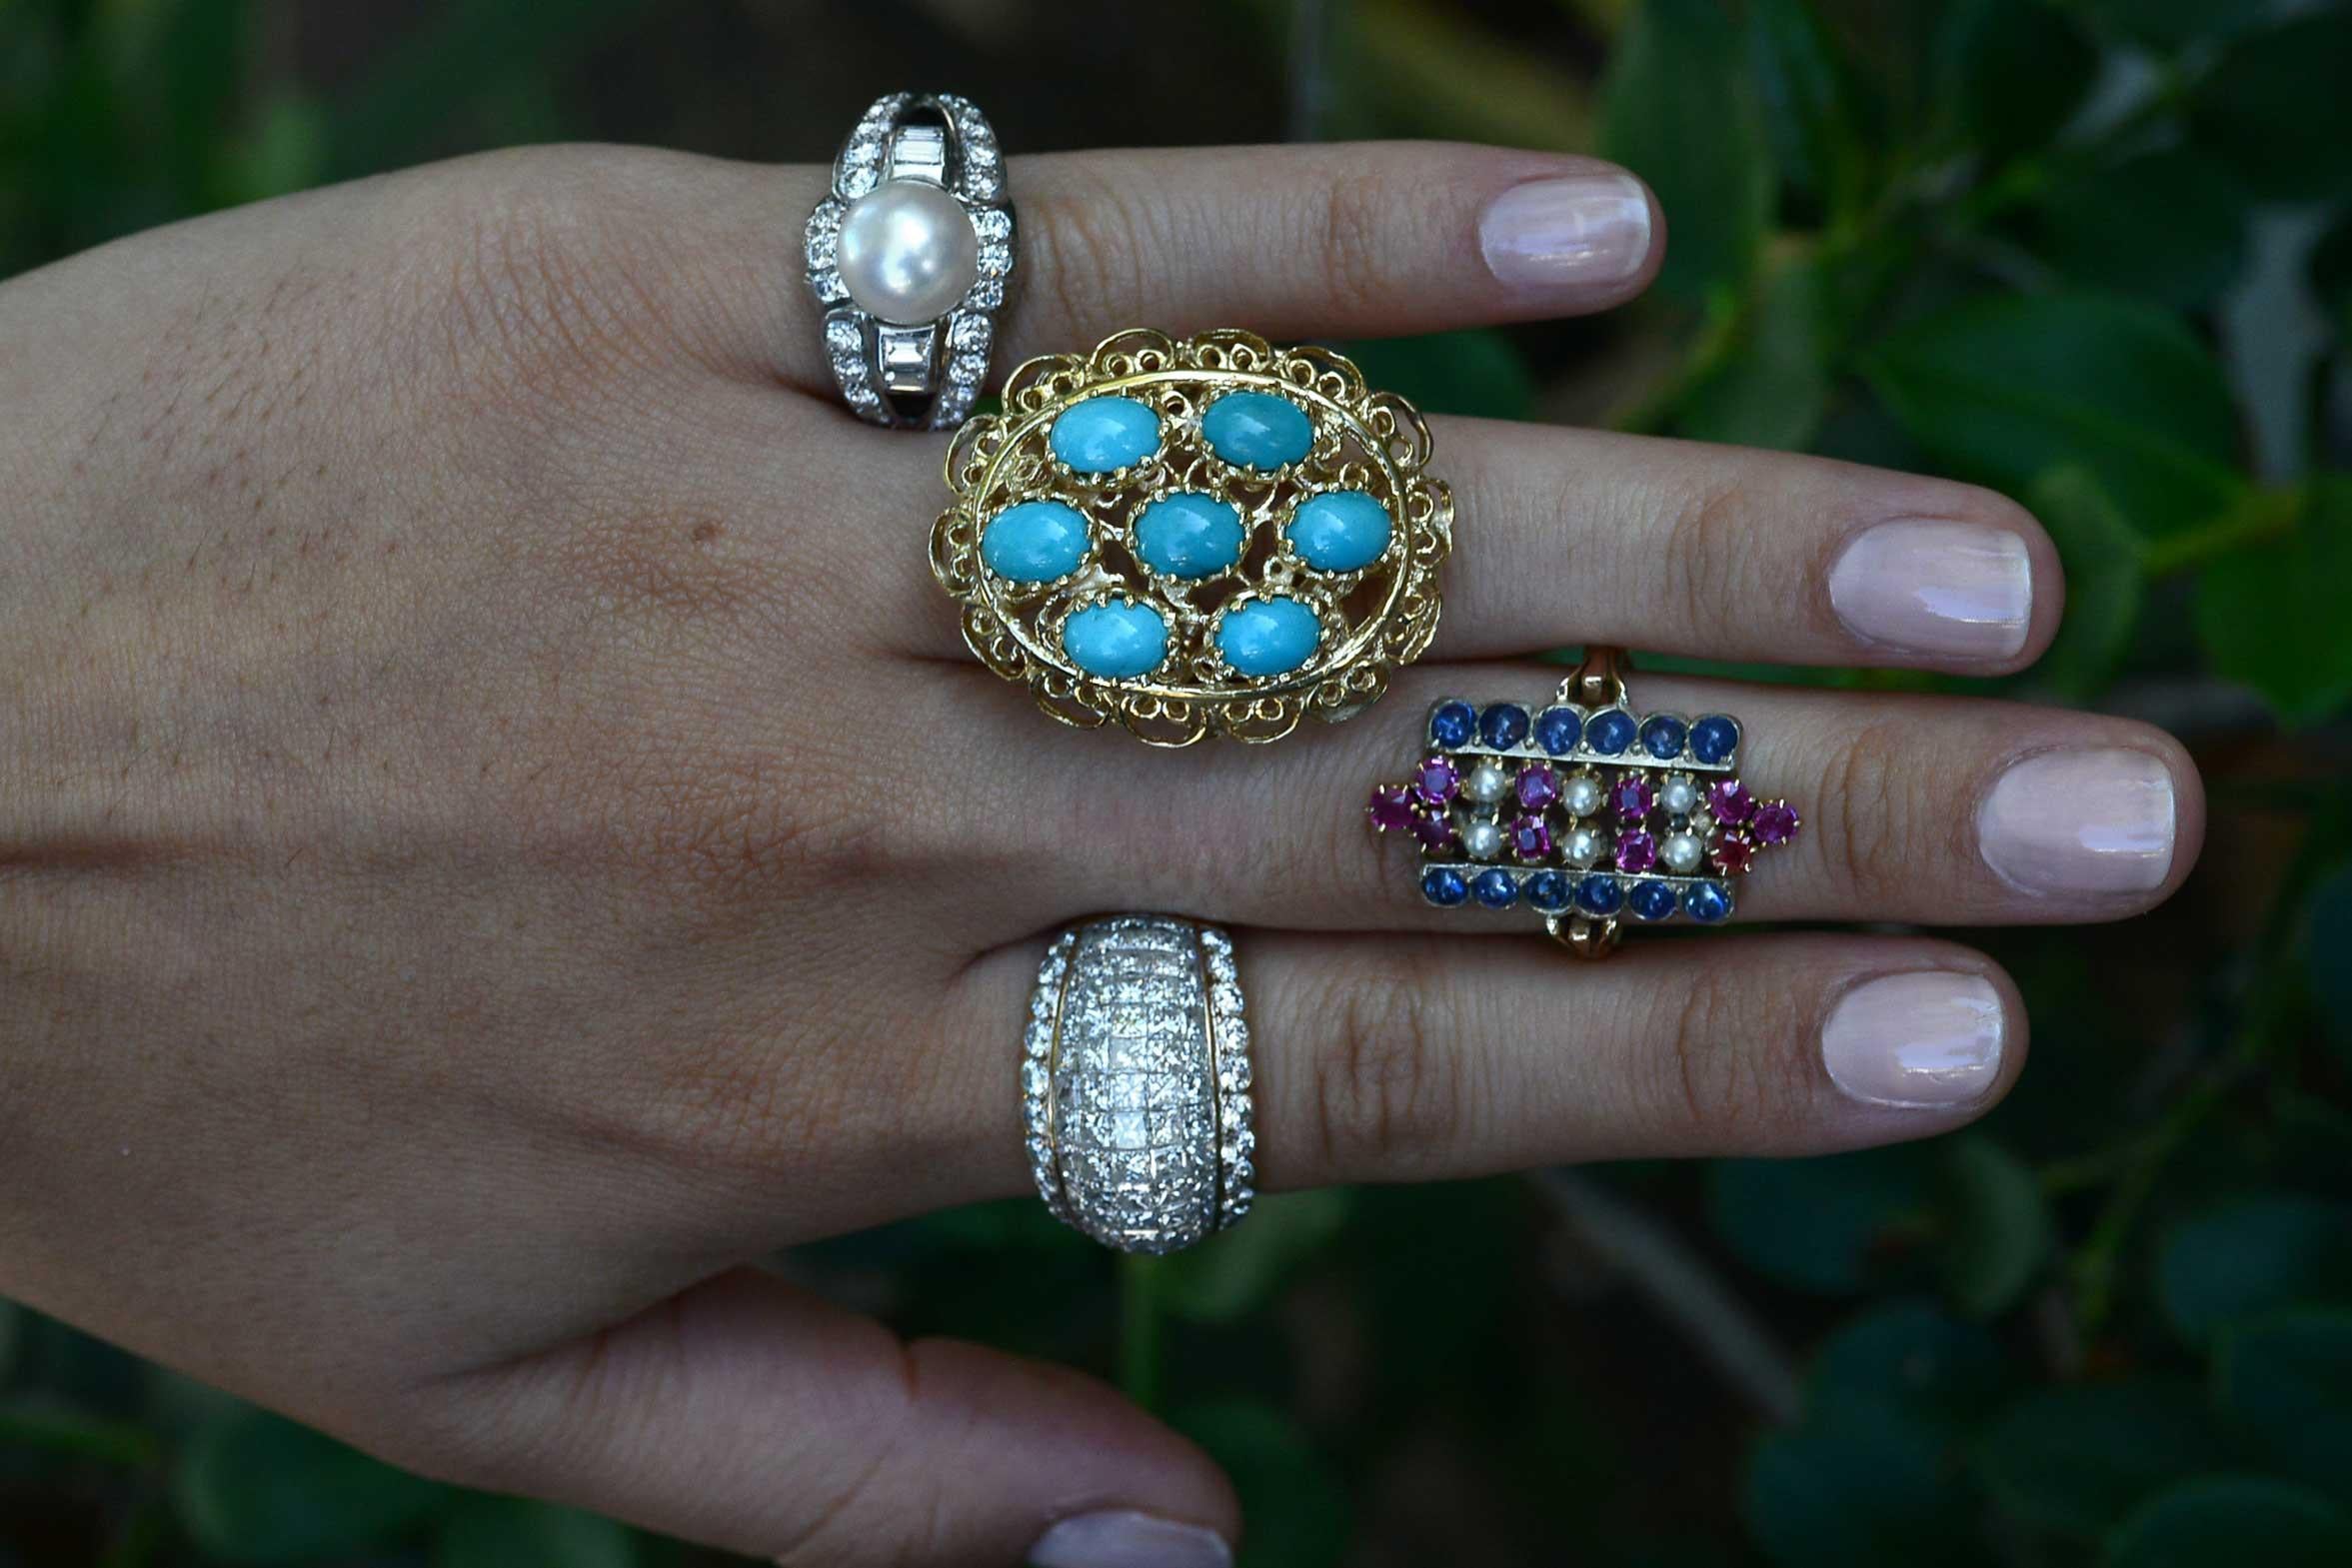 Looking like Elizabeth Taylor's rings in Cleopatra, this mid-century stunner commands attention. A cluster of 7 Persian turquoise cabochons arranged in an oval filigree-rich setting with HUGE finger coverage. A hefty chunk of gold, nearly a half